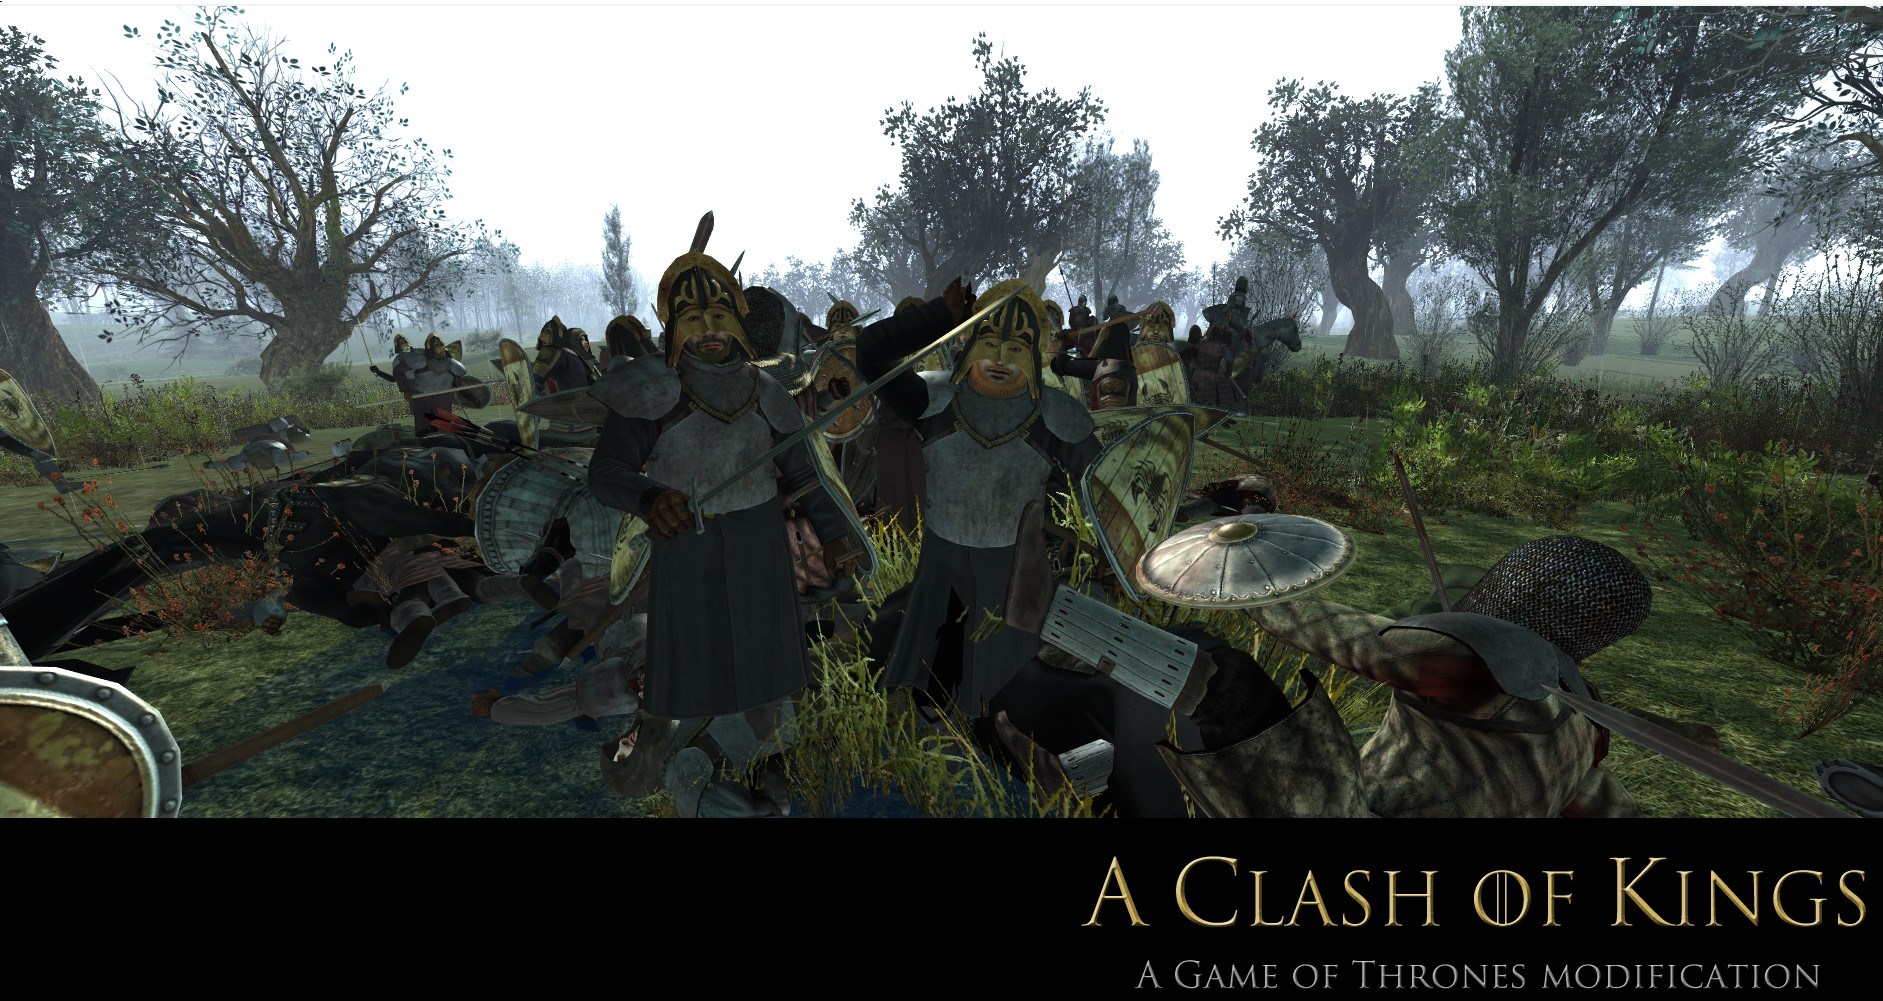 Warband игры престолов. Mount and Blade a Clash of Kings 8.0. Mount & Blade Warband "a Clash of Kings 4.1 (Rus).